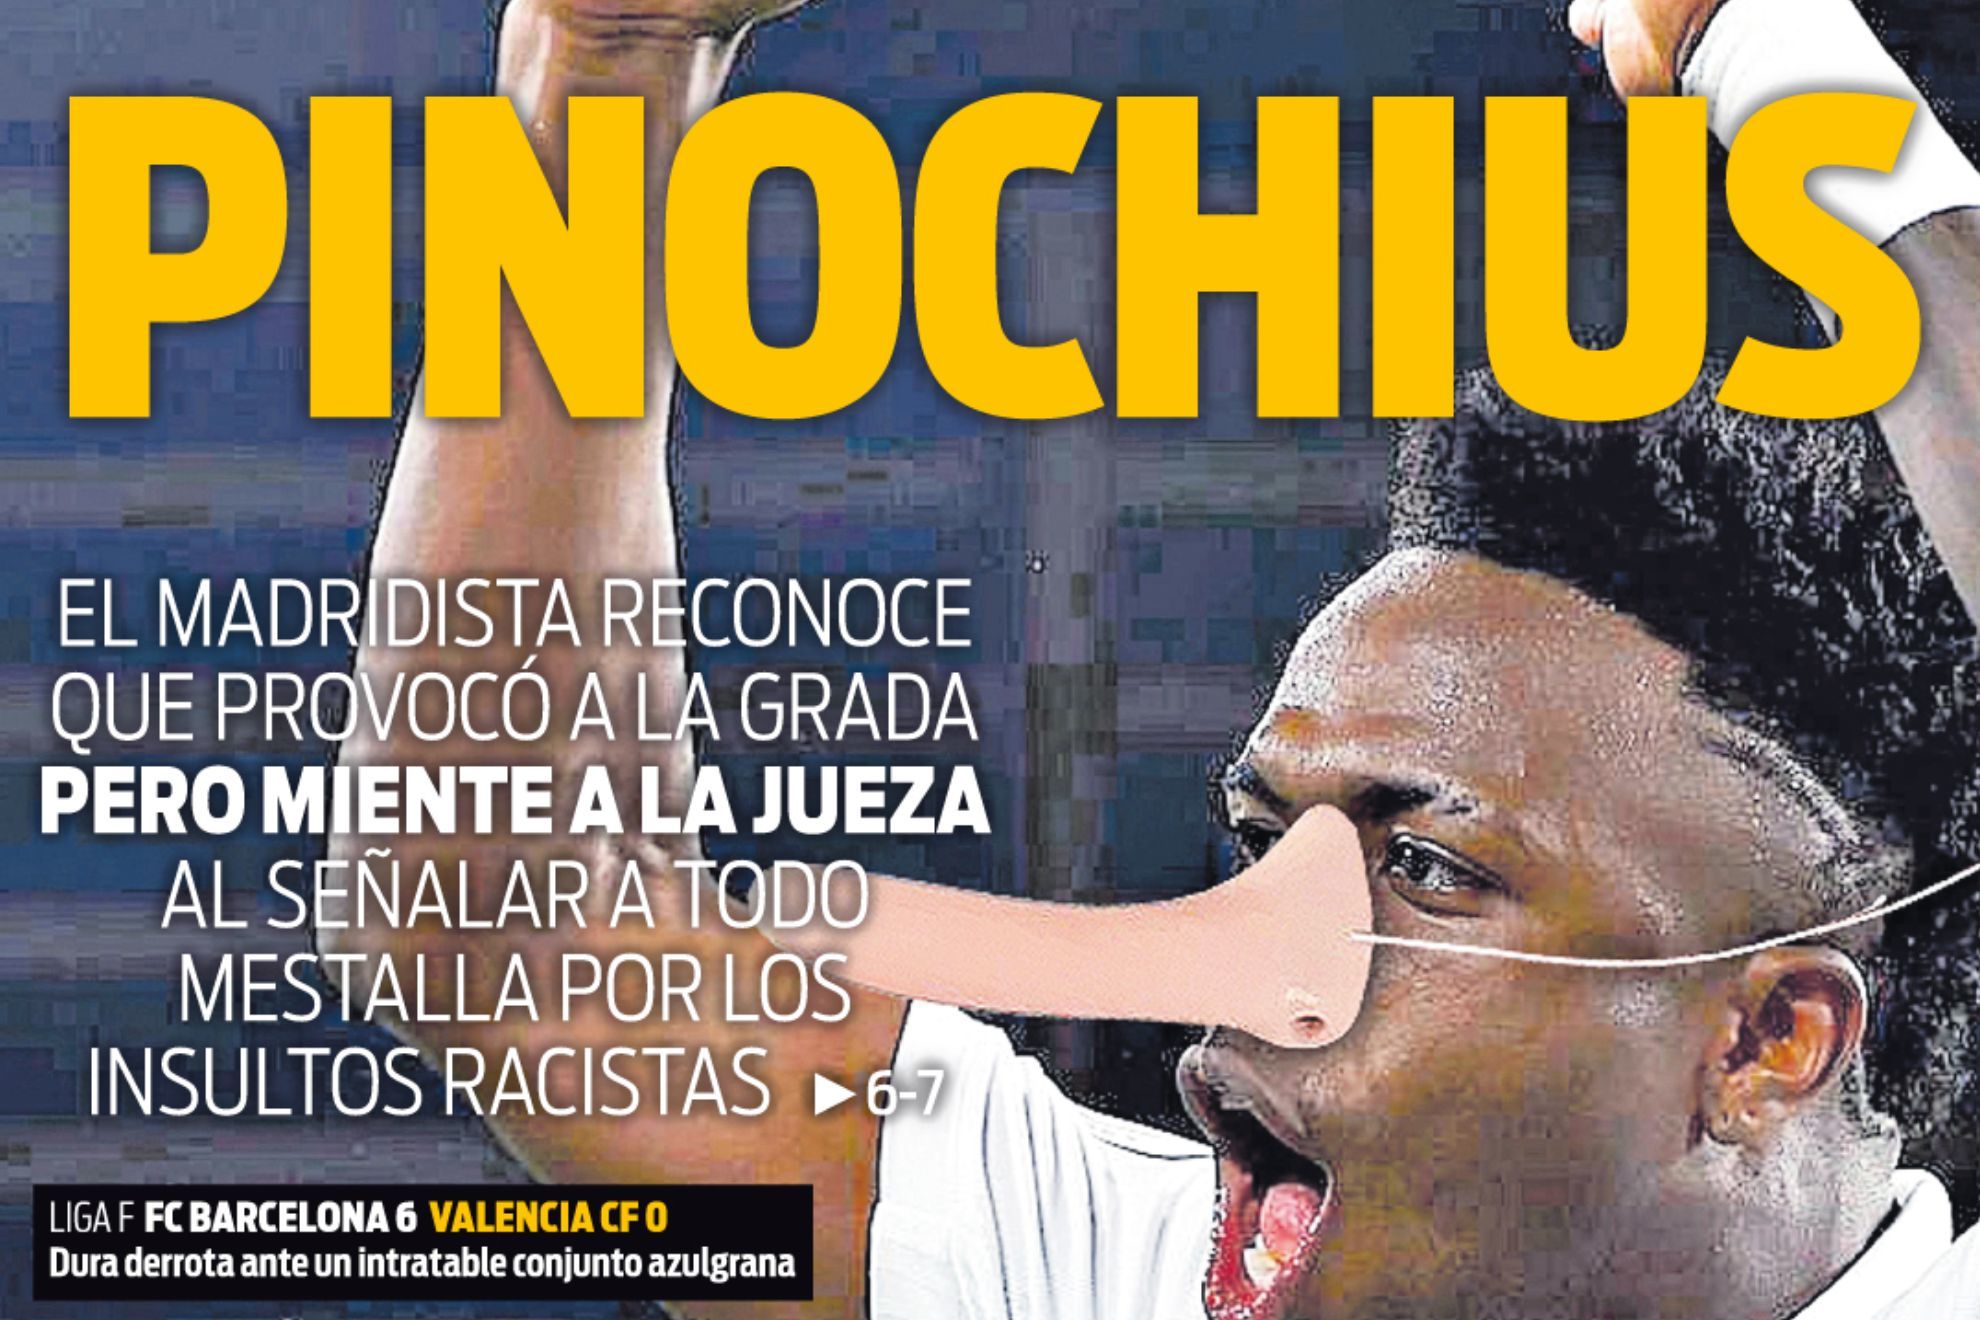 Superdeportes shocking front page of Vinicius as Pinocchio, in which they accuse the Real Madrid player of lying.